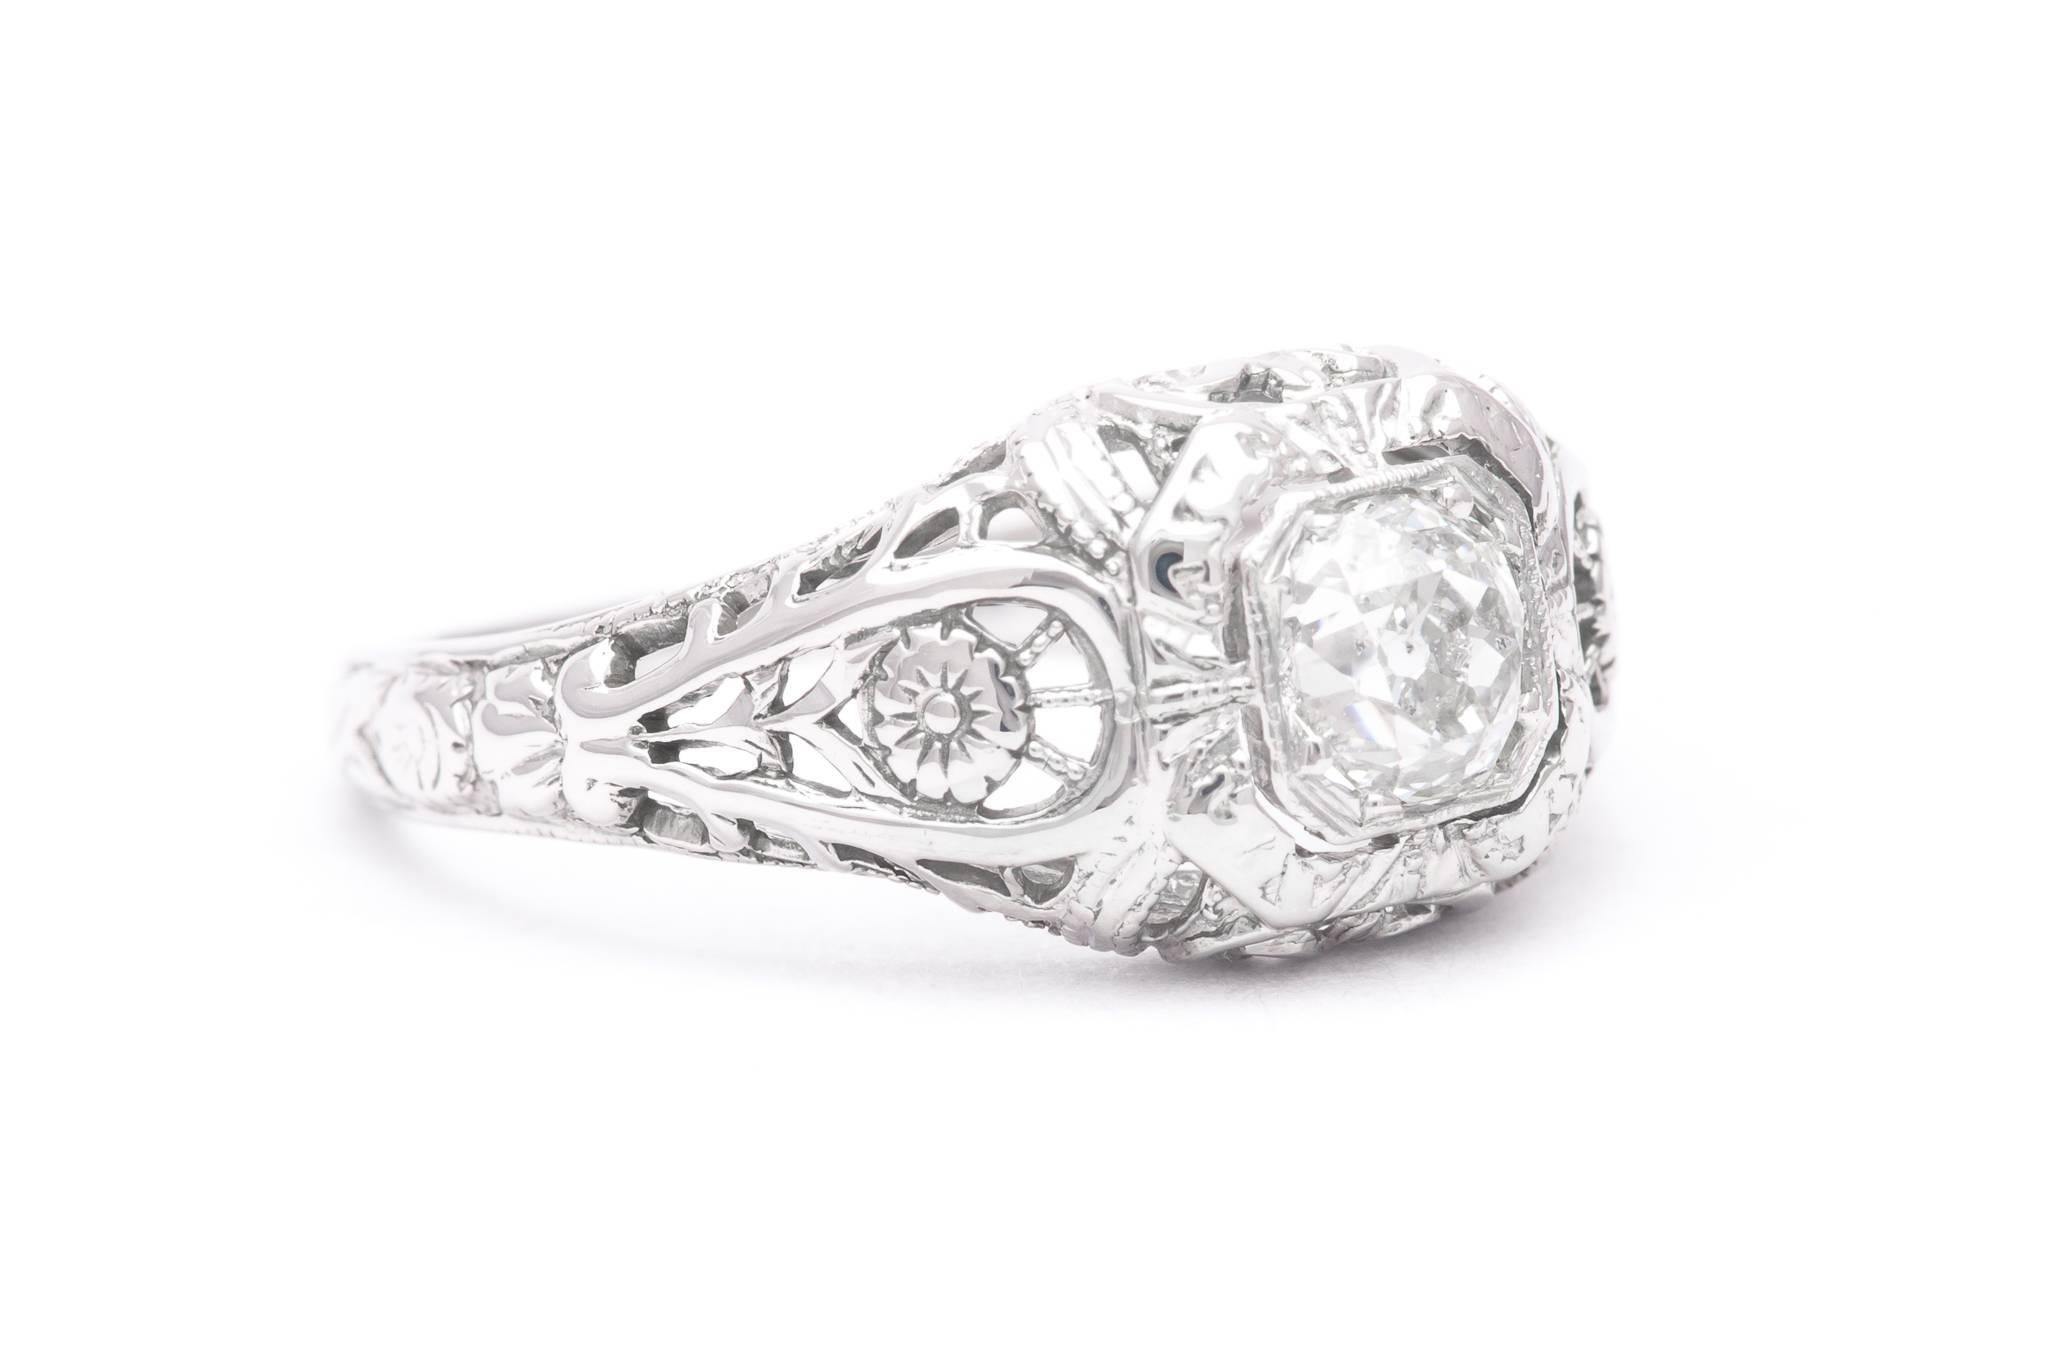 A beautiful floral motif art deco period diamond engagement ring in 18 karat white gold.  Centered by a sparkling 0.50 carat antique mine cut diamond this ring features beautiful hand pierced filigree work throughout complemented by superbly